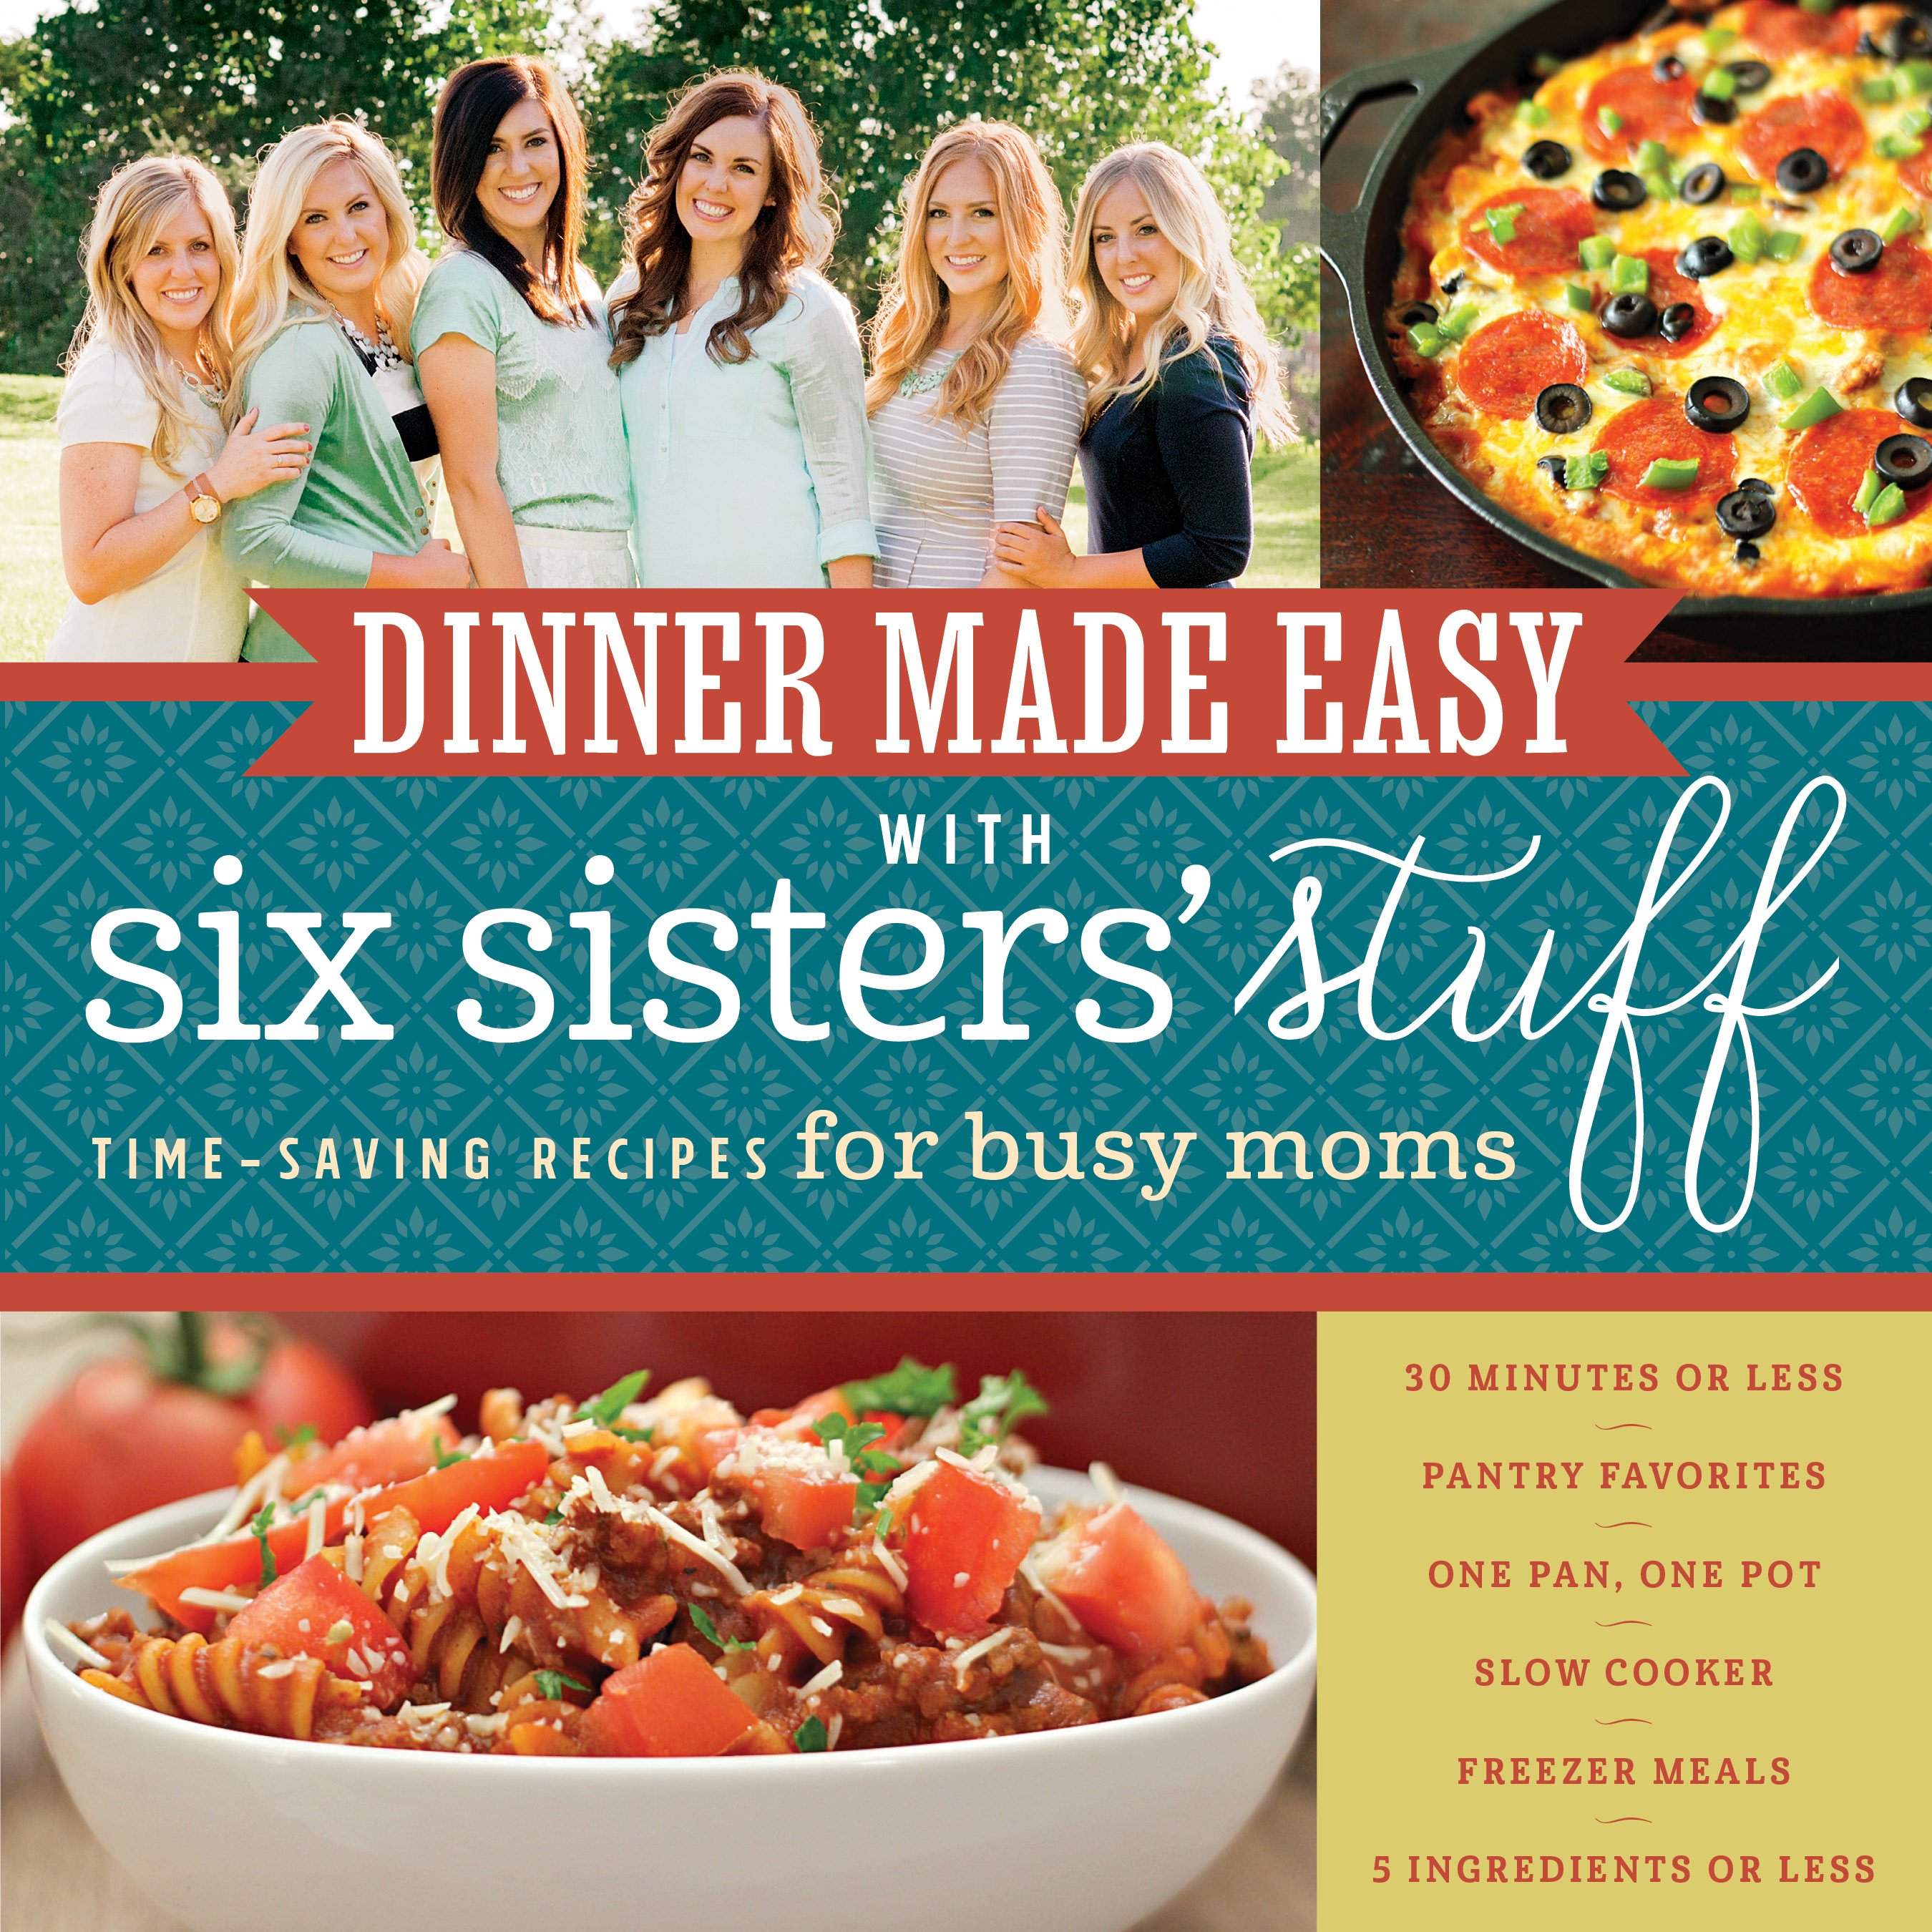 Dinner Made Easy Cook Book from SixSistersStuff.com